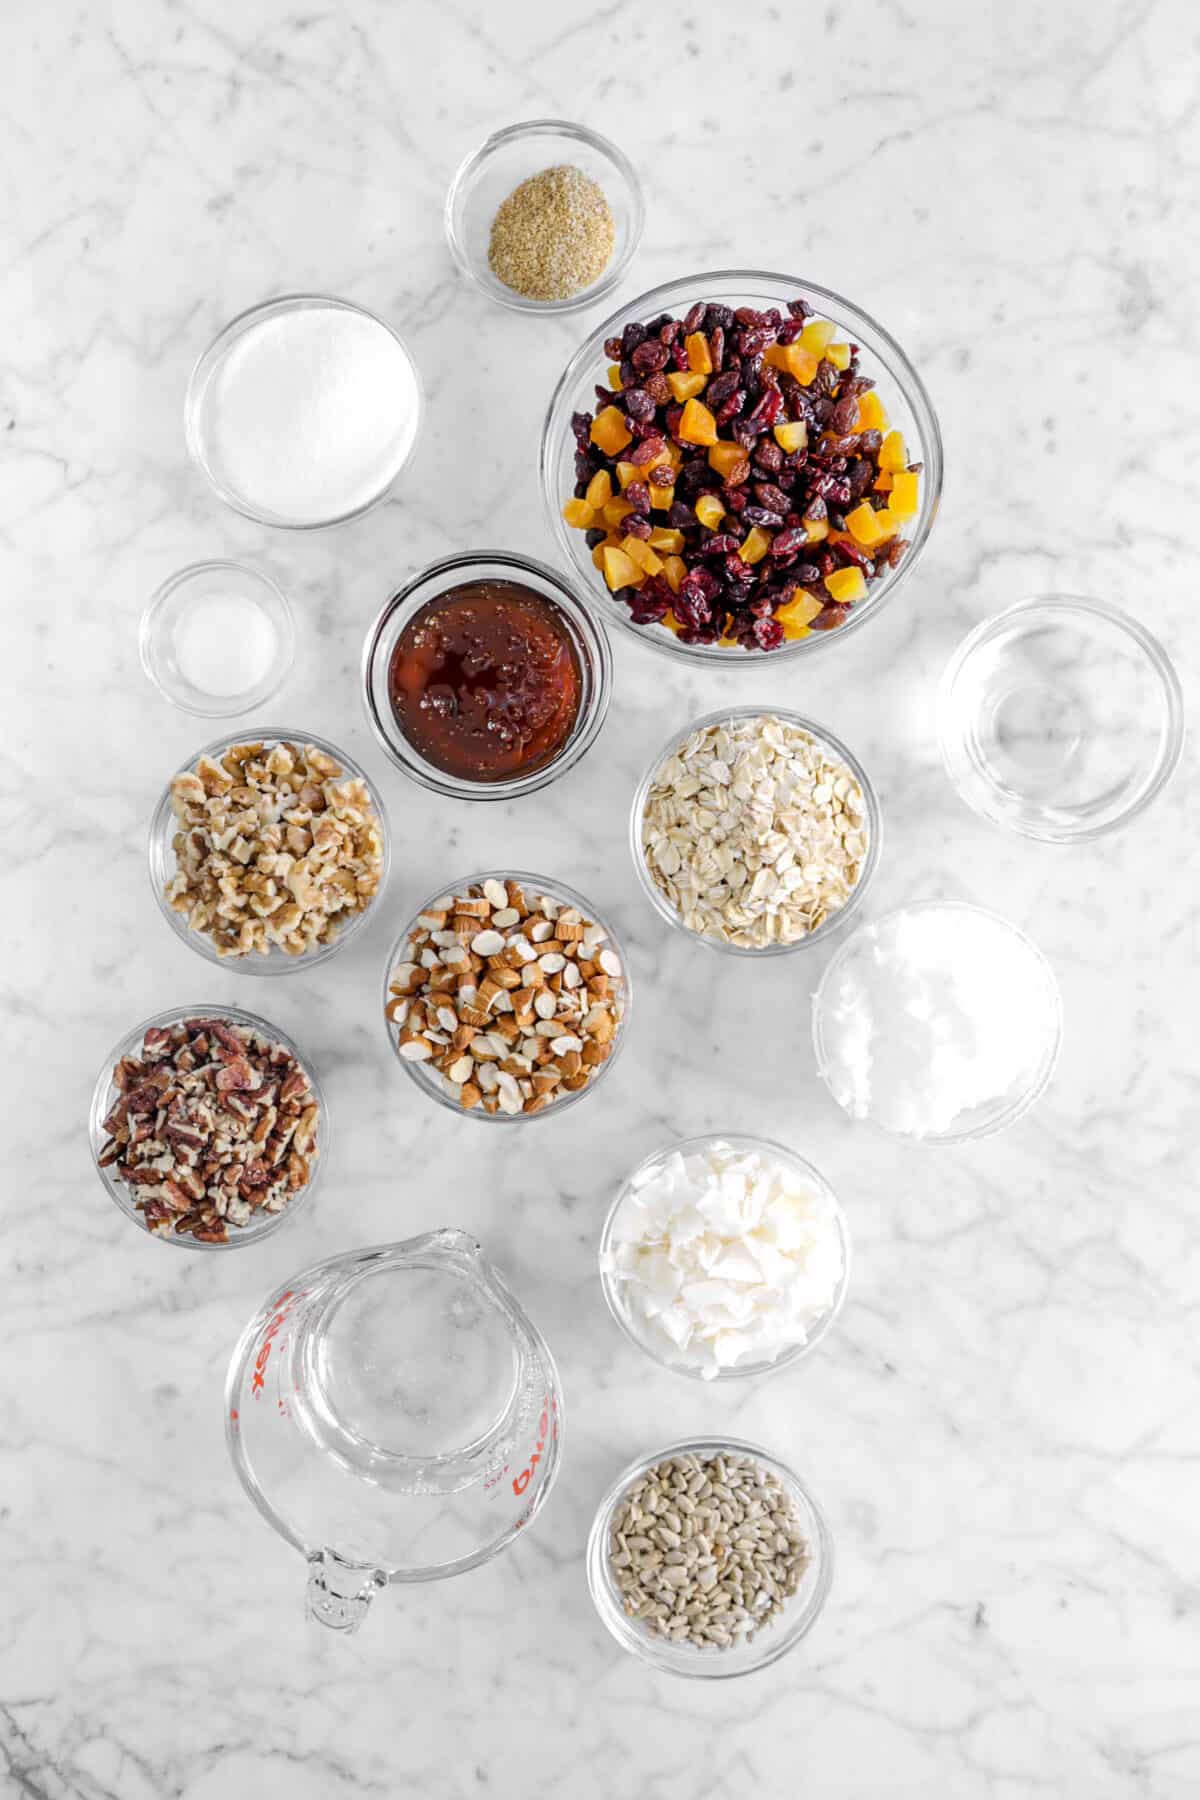 wheat germ, chopped fruit sugar, salt, honey, chopped walnuts, almonds, pecans, oatmeal, water, coconut oil, coconut flakes, water, corn syrup, and pumpkin seeds in glass bowls